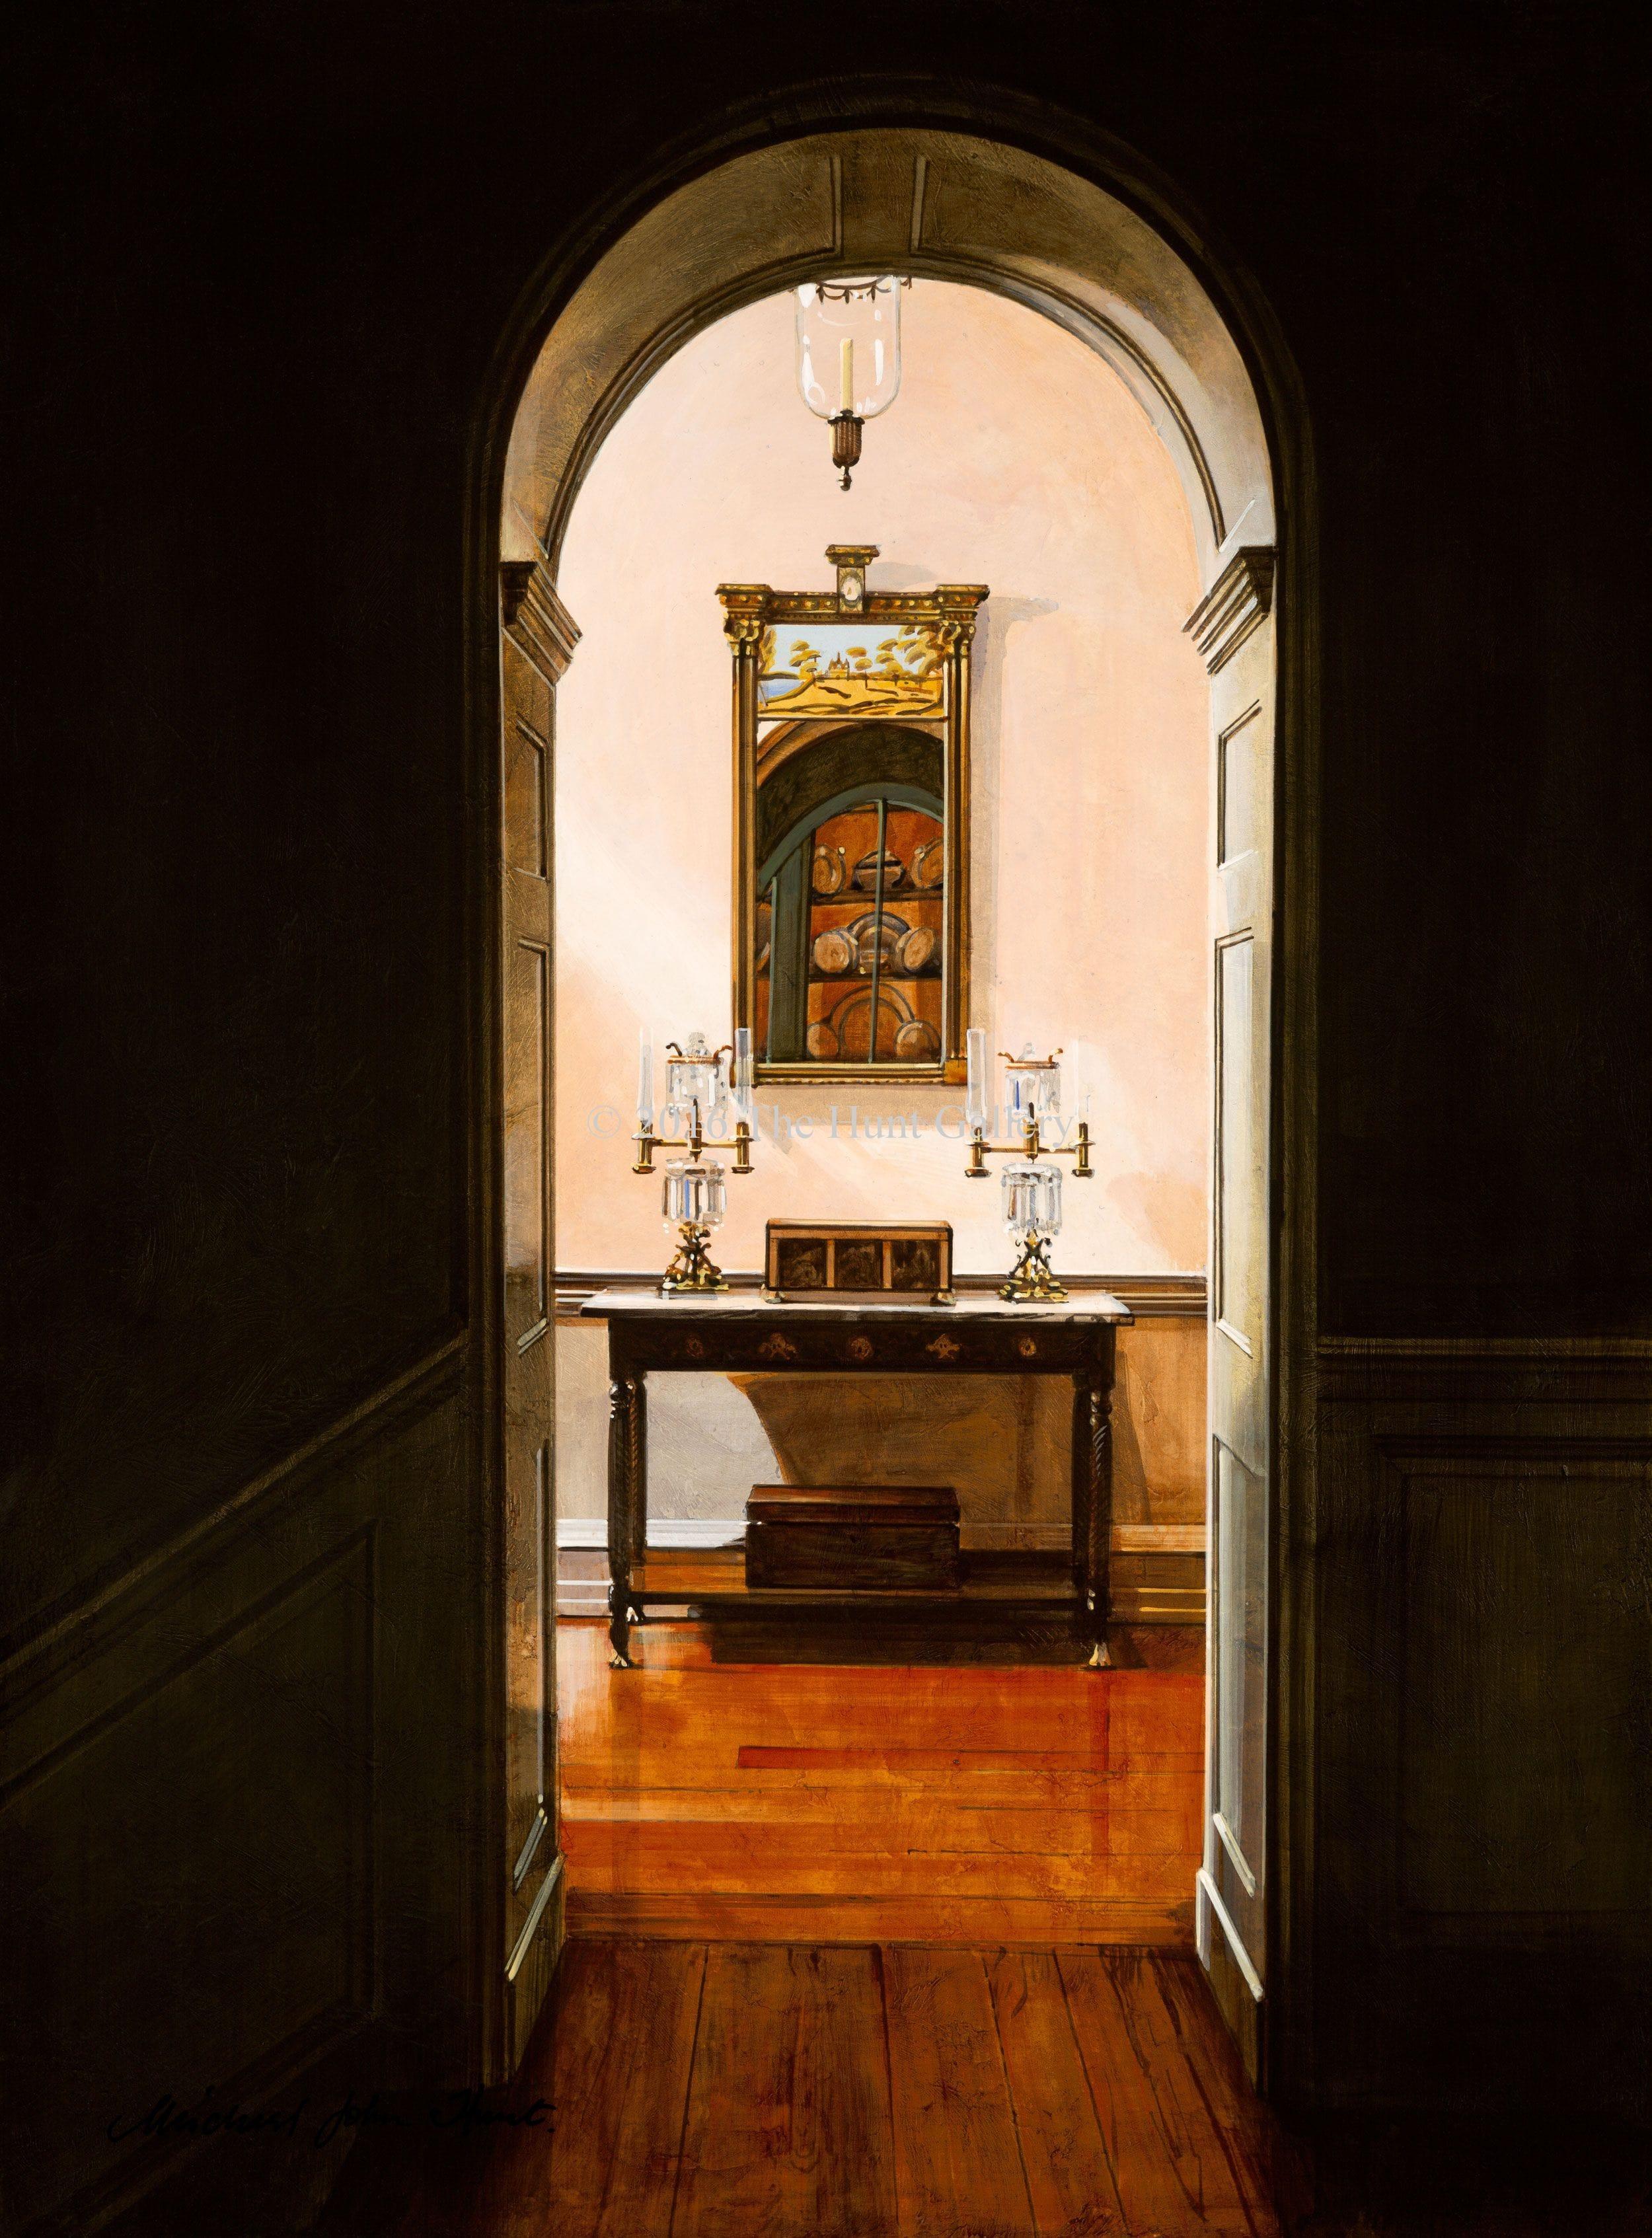 The vestibule takes its name from famed cabinetmaker Duncan Phyfe who had a successful business in New York City from ca. 1790 to 1847. His shop employed almost a hundred craftsmen and attracted many of New York City's leading citizens as